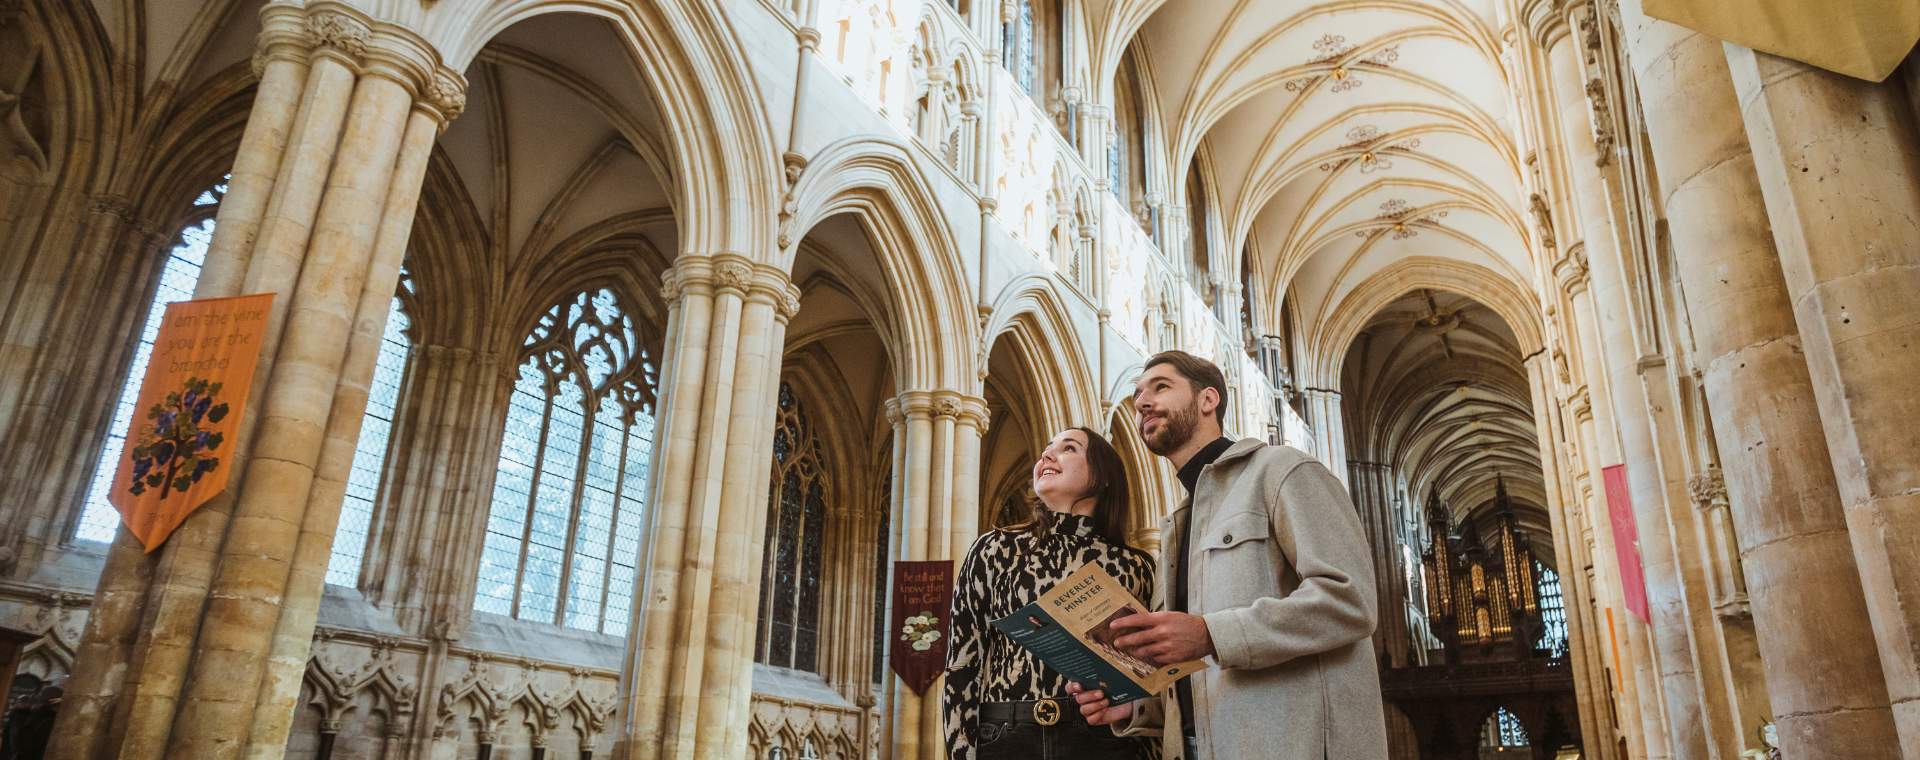 A couple admiring the architecture inside Beverley Minster